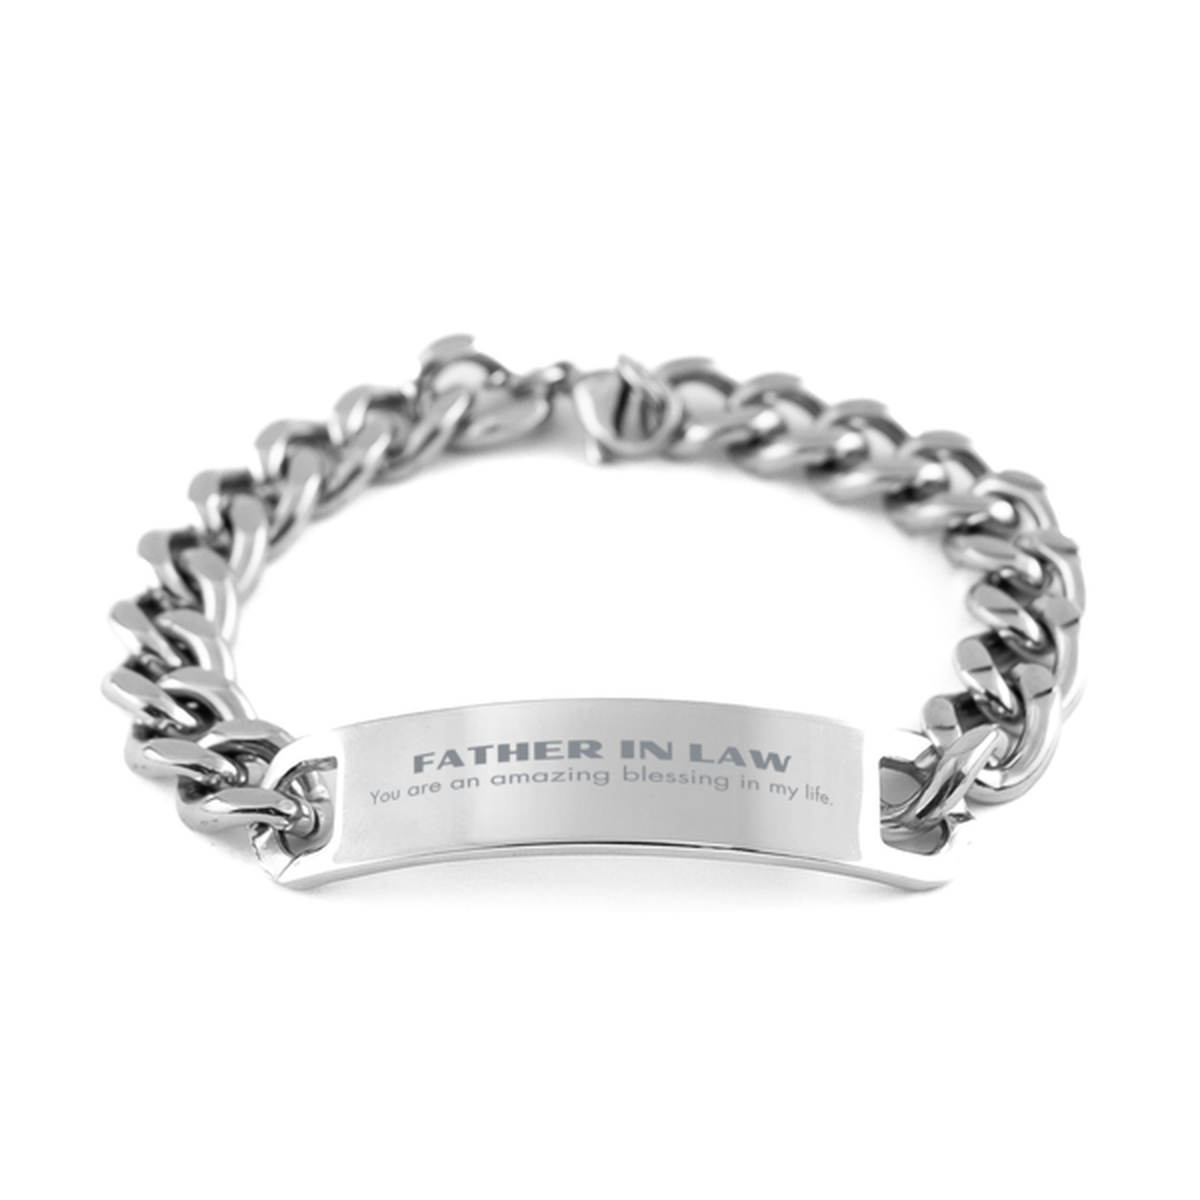 Father In Law Cuban Chain Stainless Steel Bracelet, You are an amazing blessing in my life, Thank You Gifts For Father In Law, Inspirational Birthday Christmas Unique Gifts For Father In Law